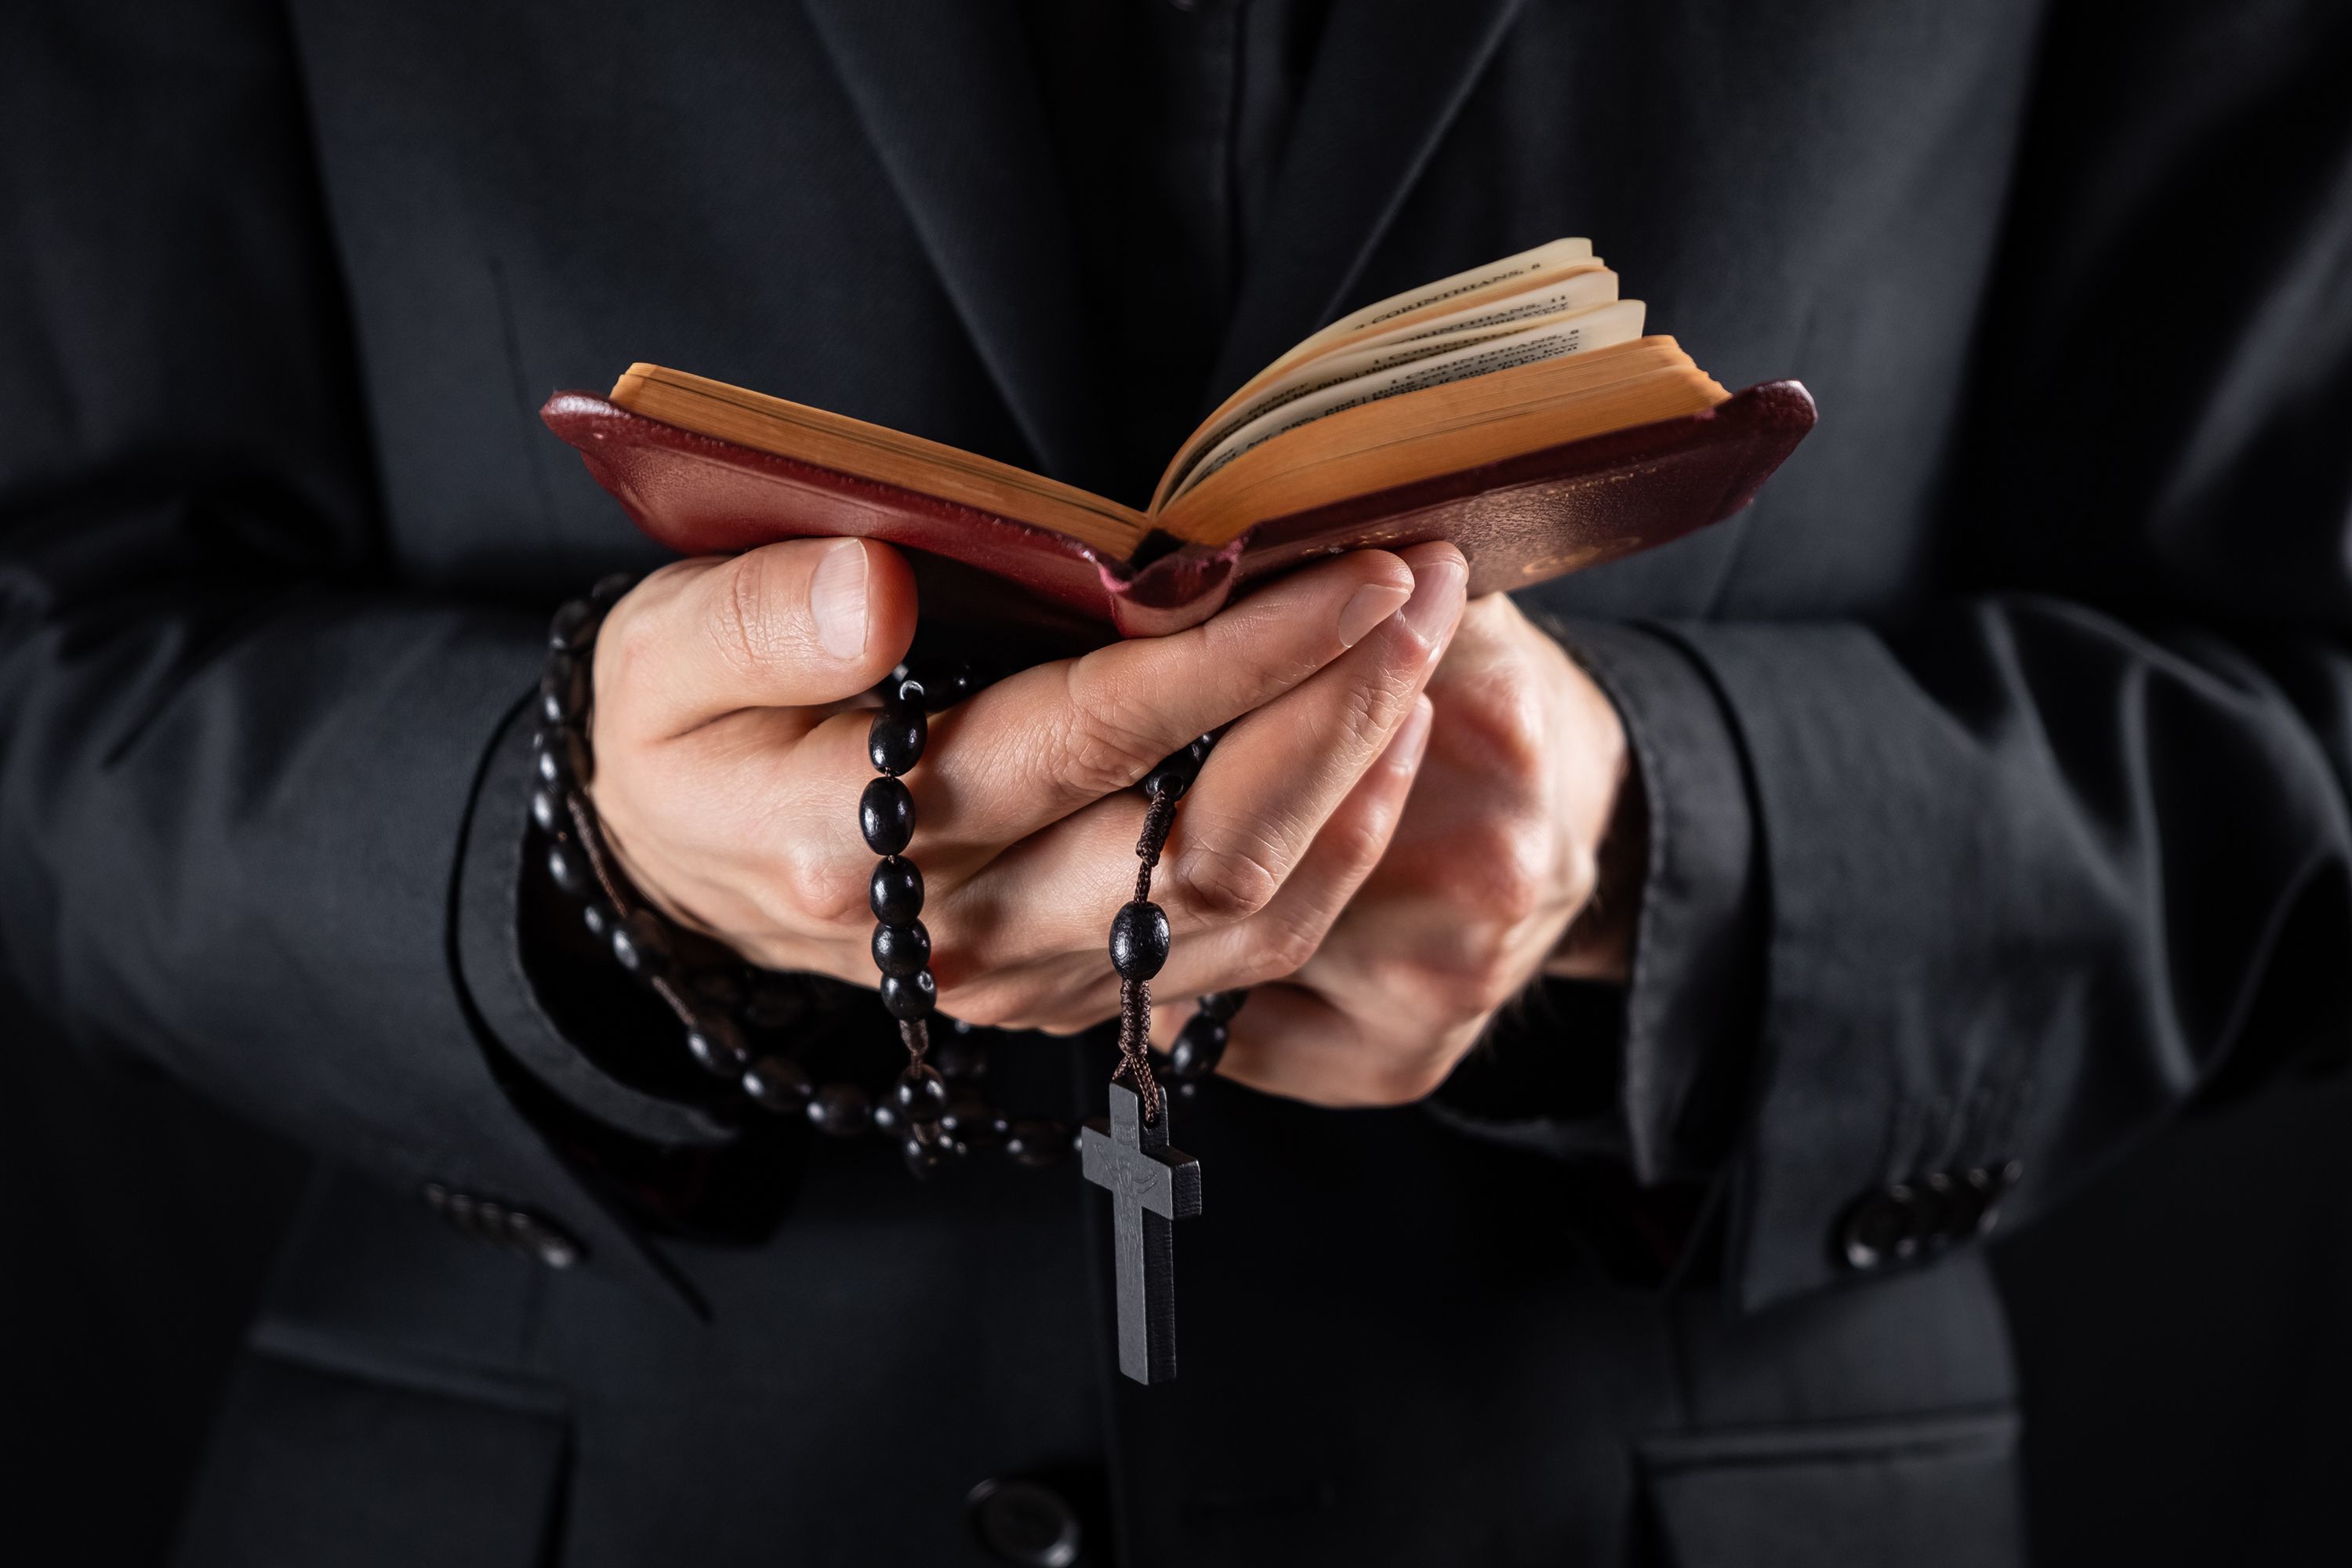 Praying with the Bible and Rosary